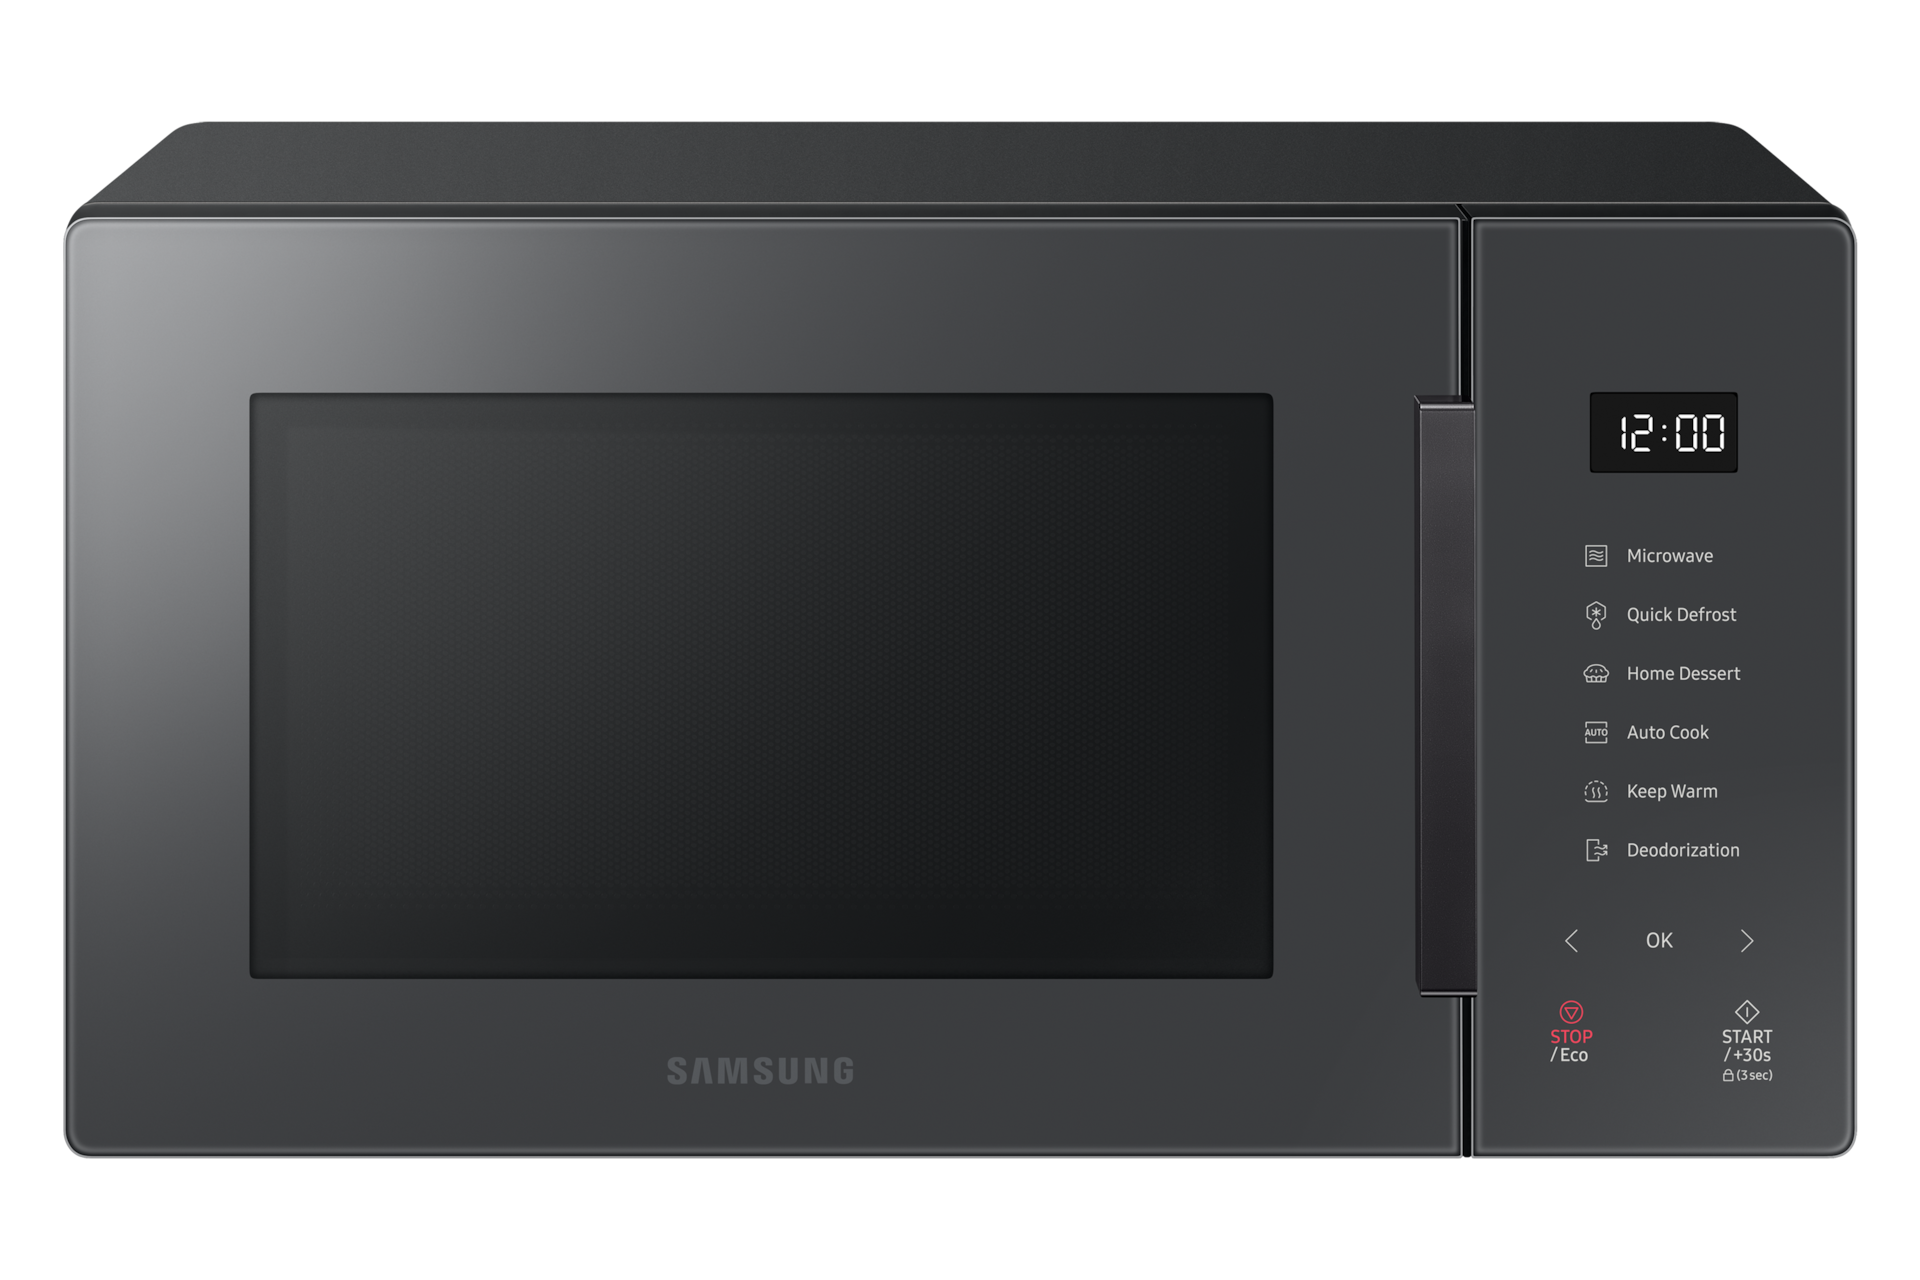 Samsung Mikrowelle Bespoke, Clean Charcoal, 23l, 800W, MS23T5018AC